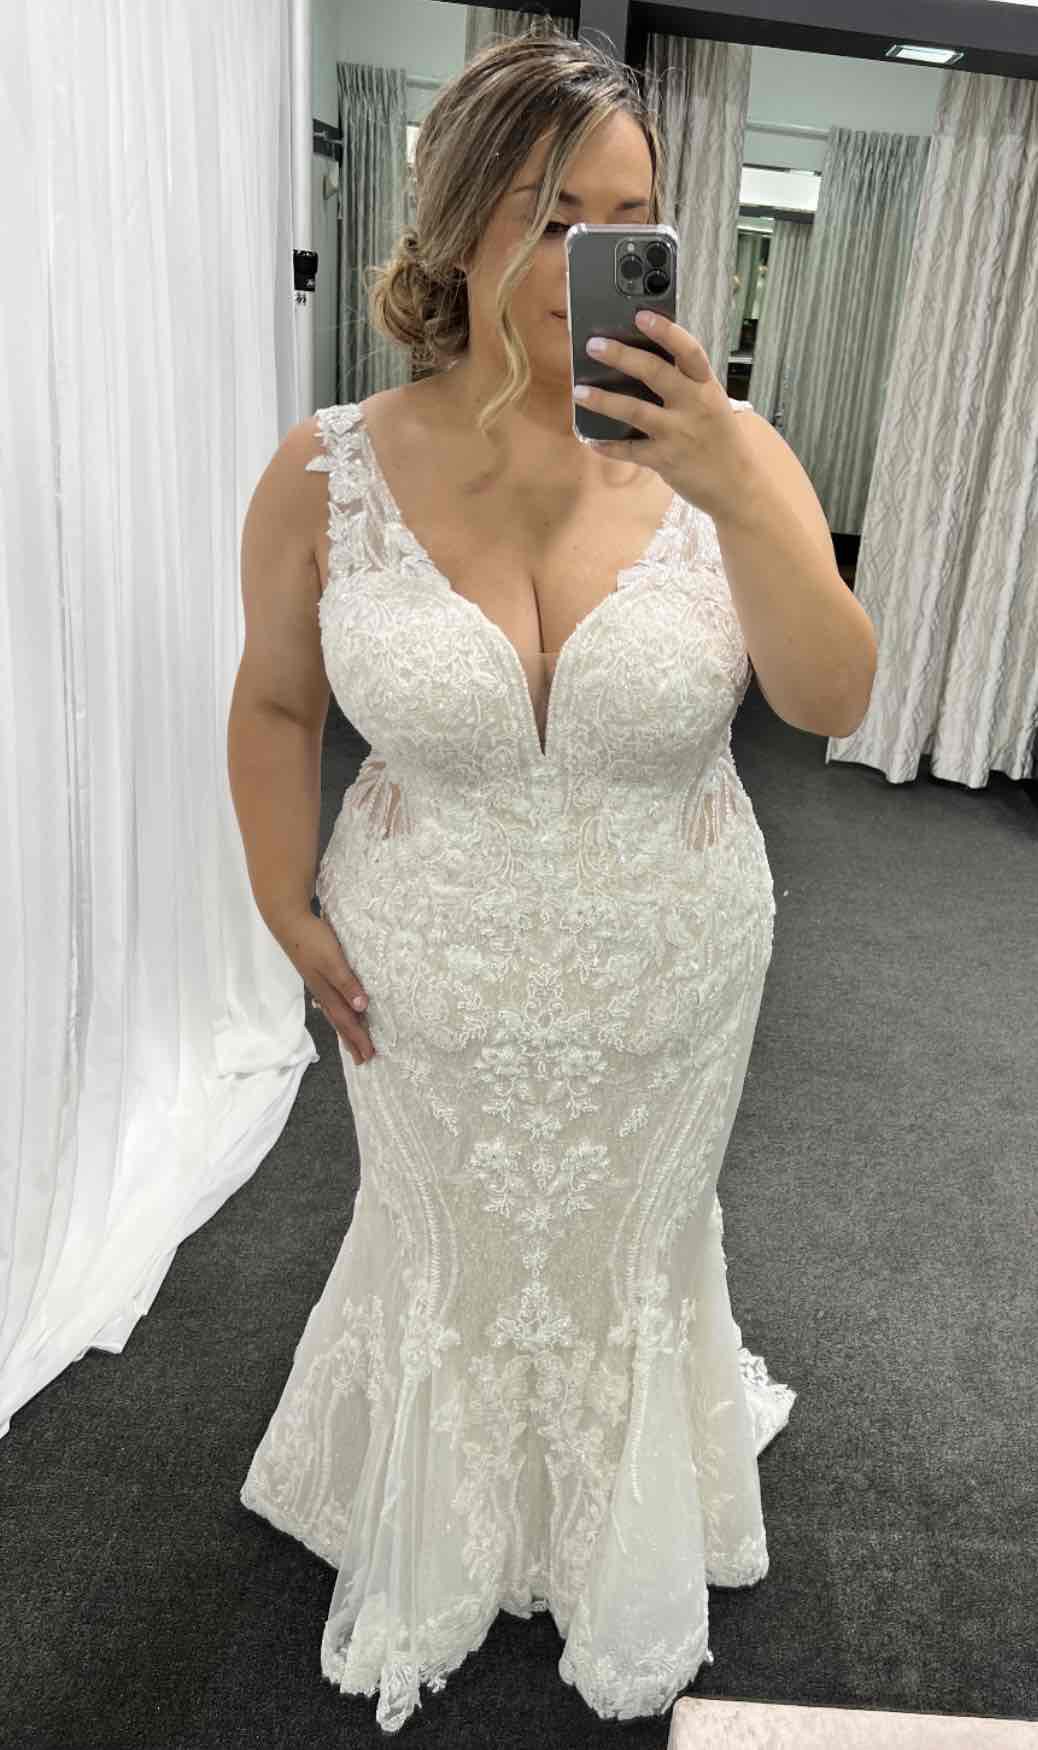 Martina Liana - SEXY FIT-AND-FLARE WEDDING DRESS WITH ORNATE LACE